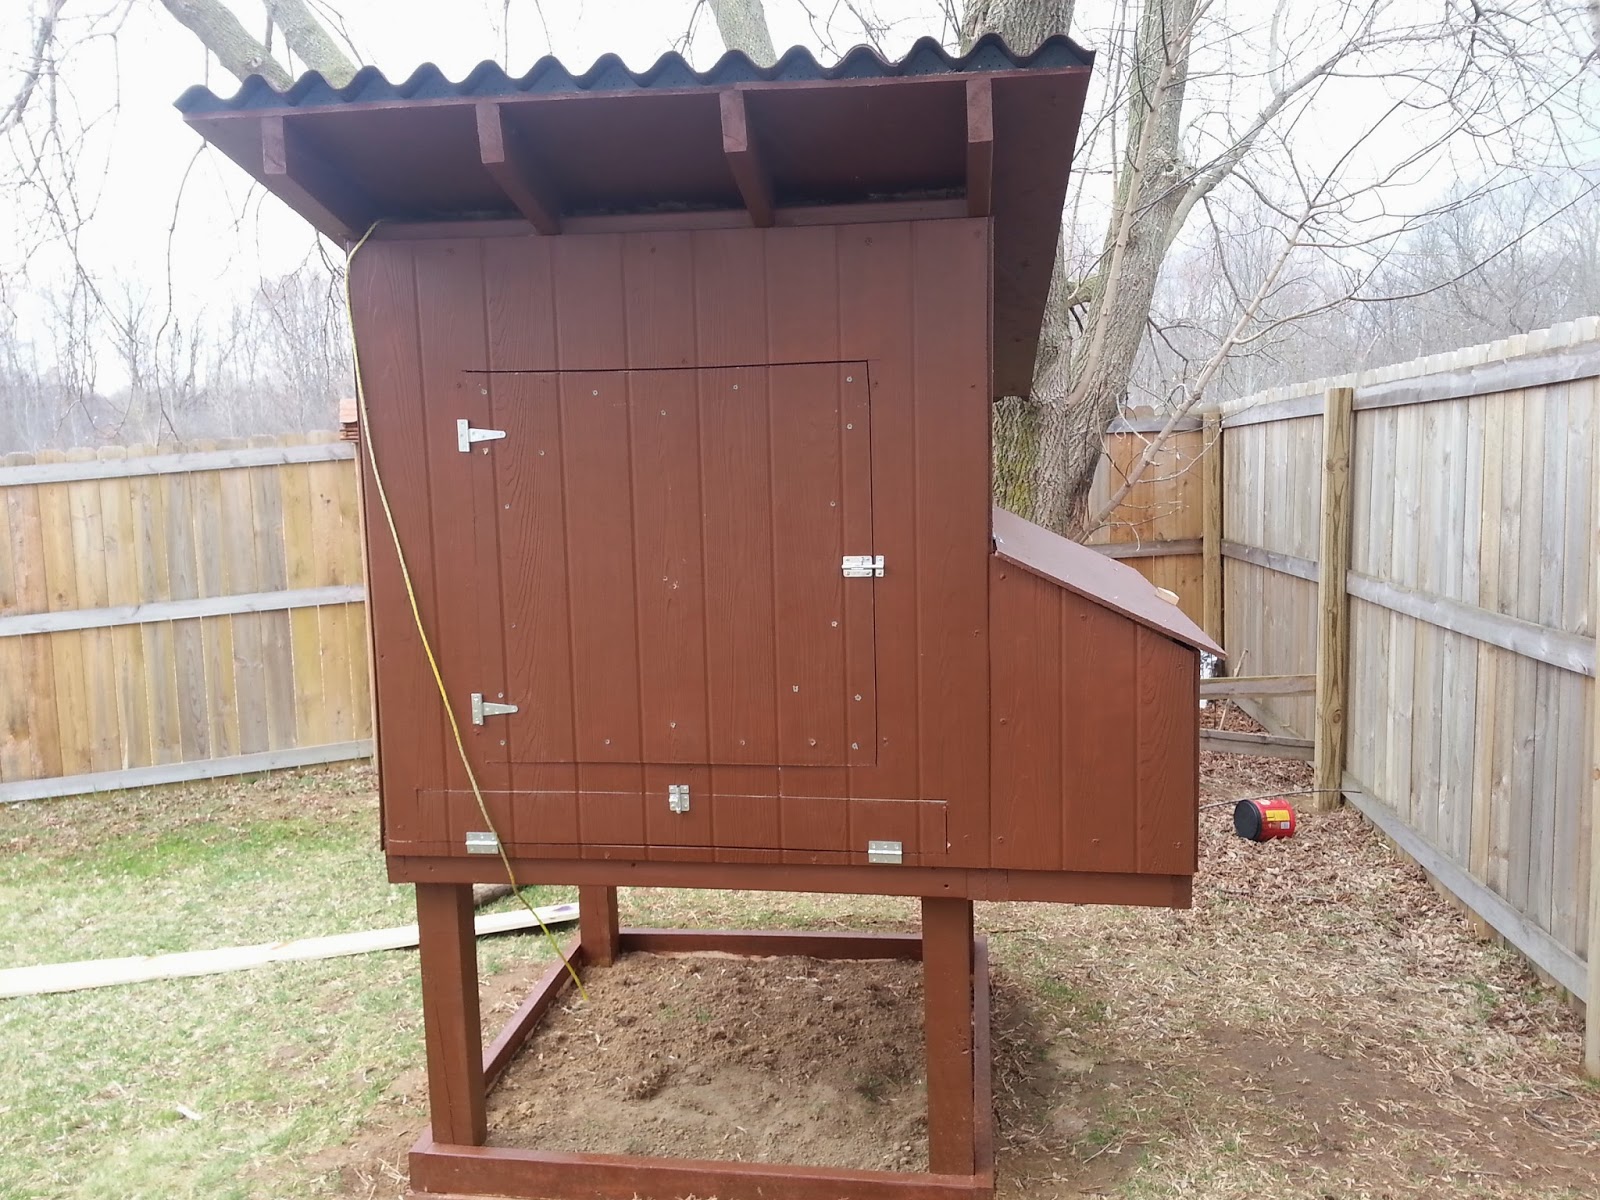 How to Build the Easy to Clean Backyard Chicken Coop - Part One 